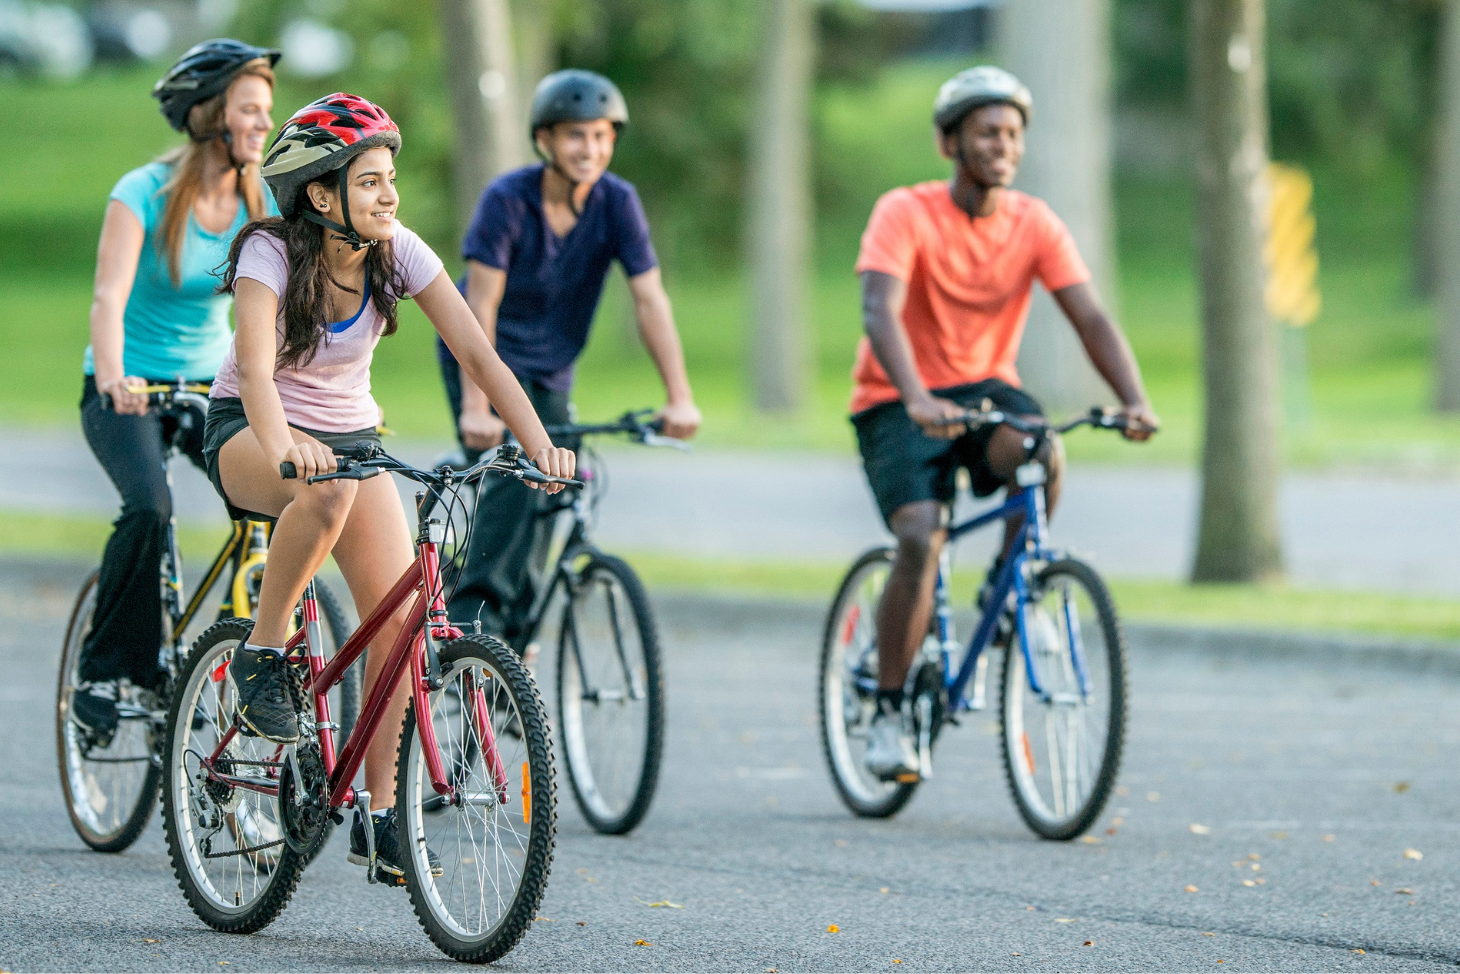 Four teens riding bikes on a street while wearing helmets